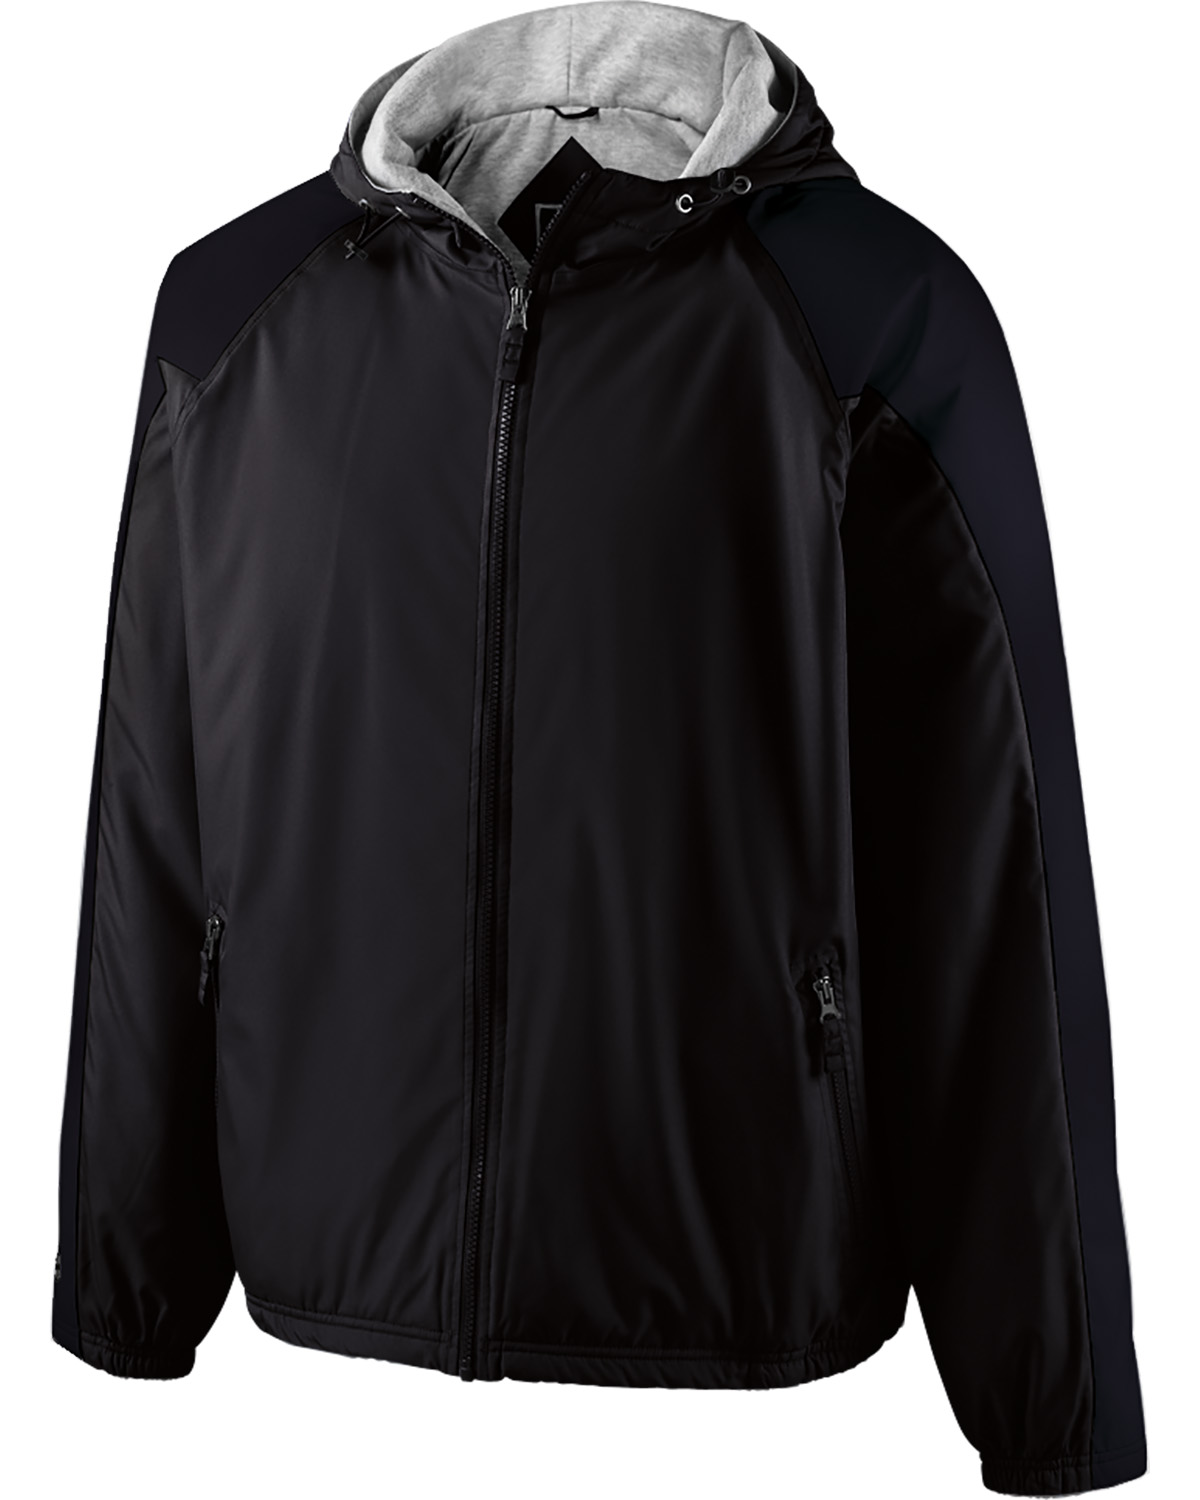 Holloway 229111 - Adult Polyester Full Zip Hooded Homefield Jacket